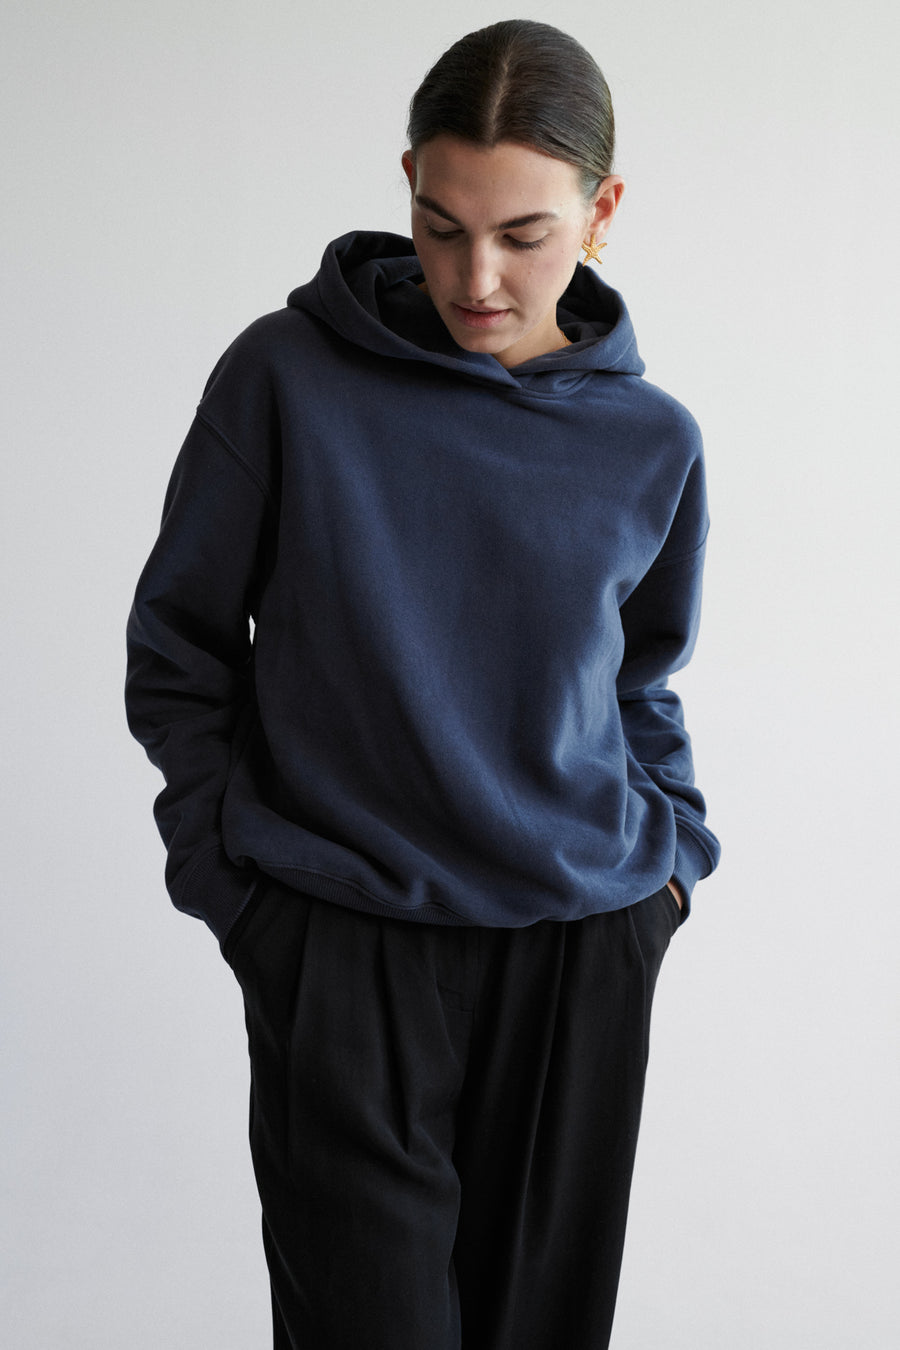 Sweatshirt in cotton / 17 / 15 / volcanid sand *tencel-trousers-05-02-onyx-black* ?The model is 178 cm tall and wears size XS/S?